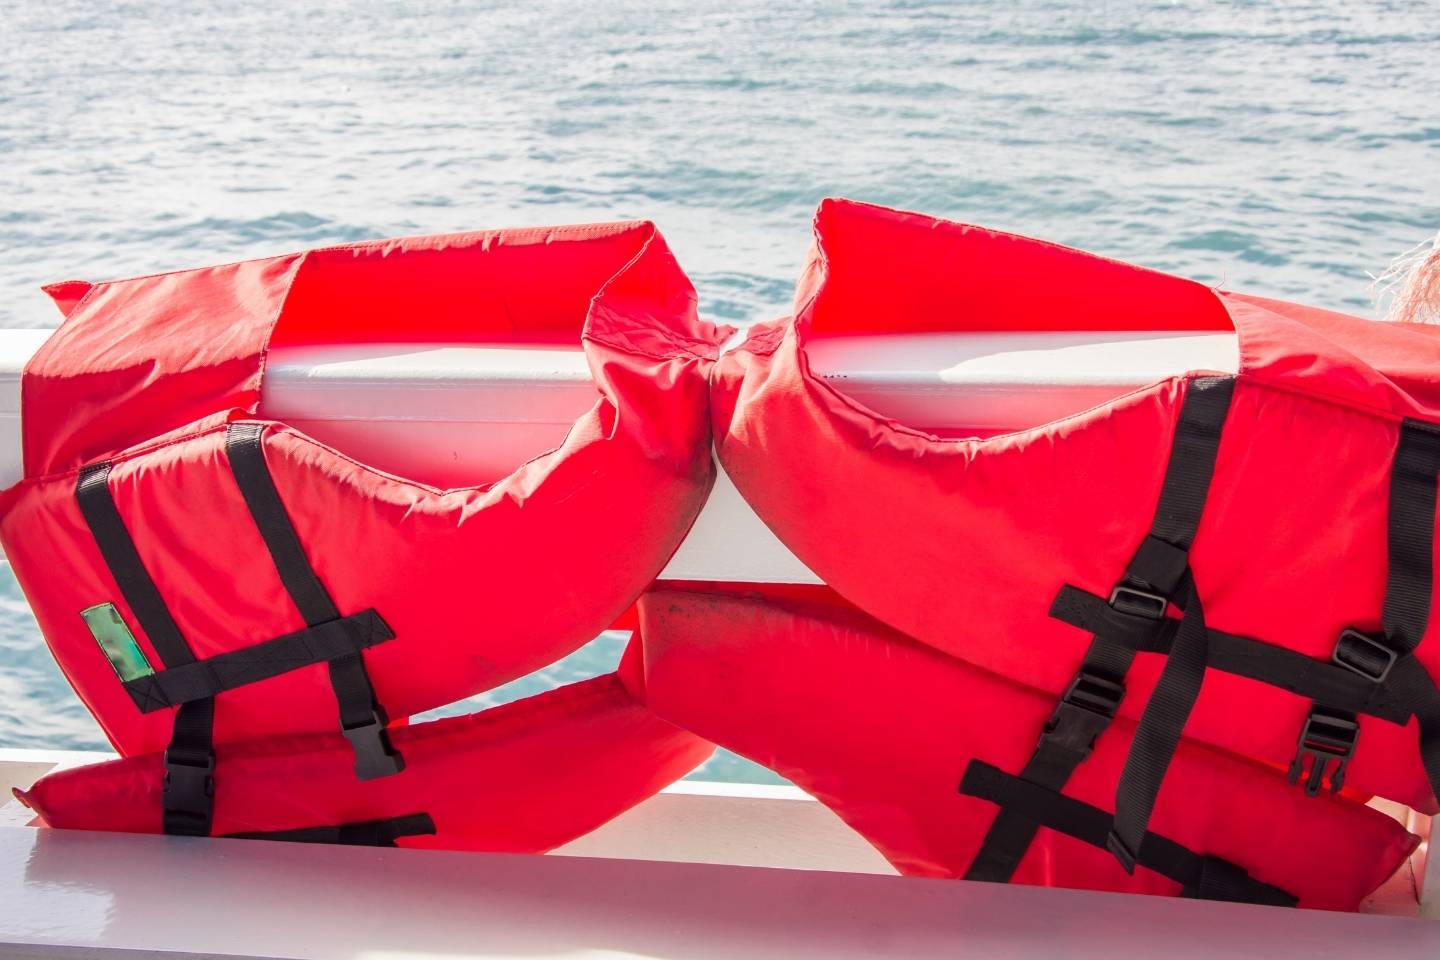 Two red life jackets